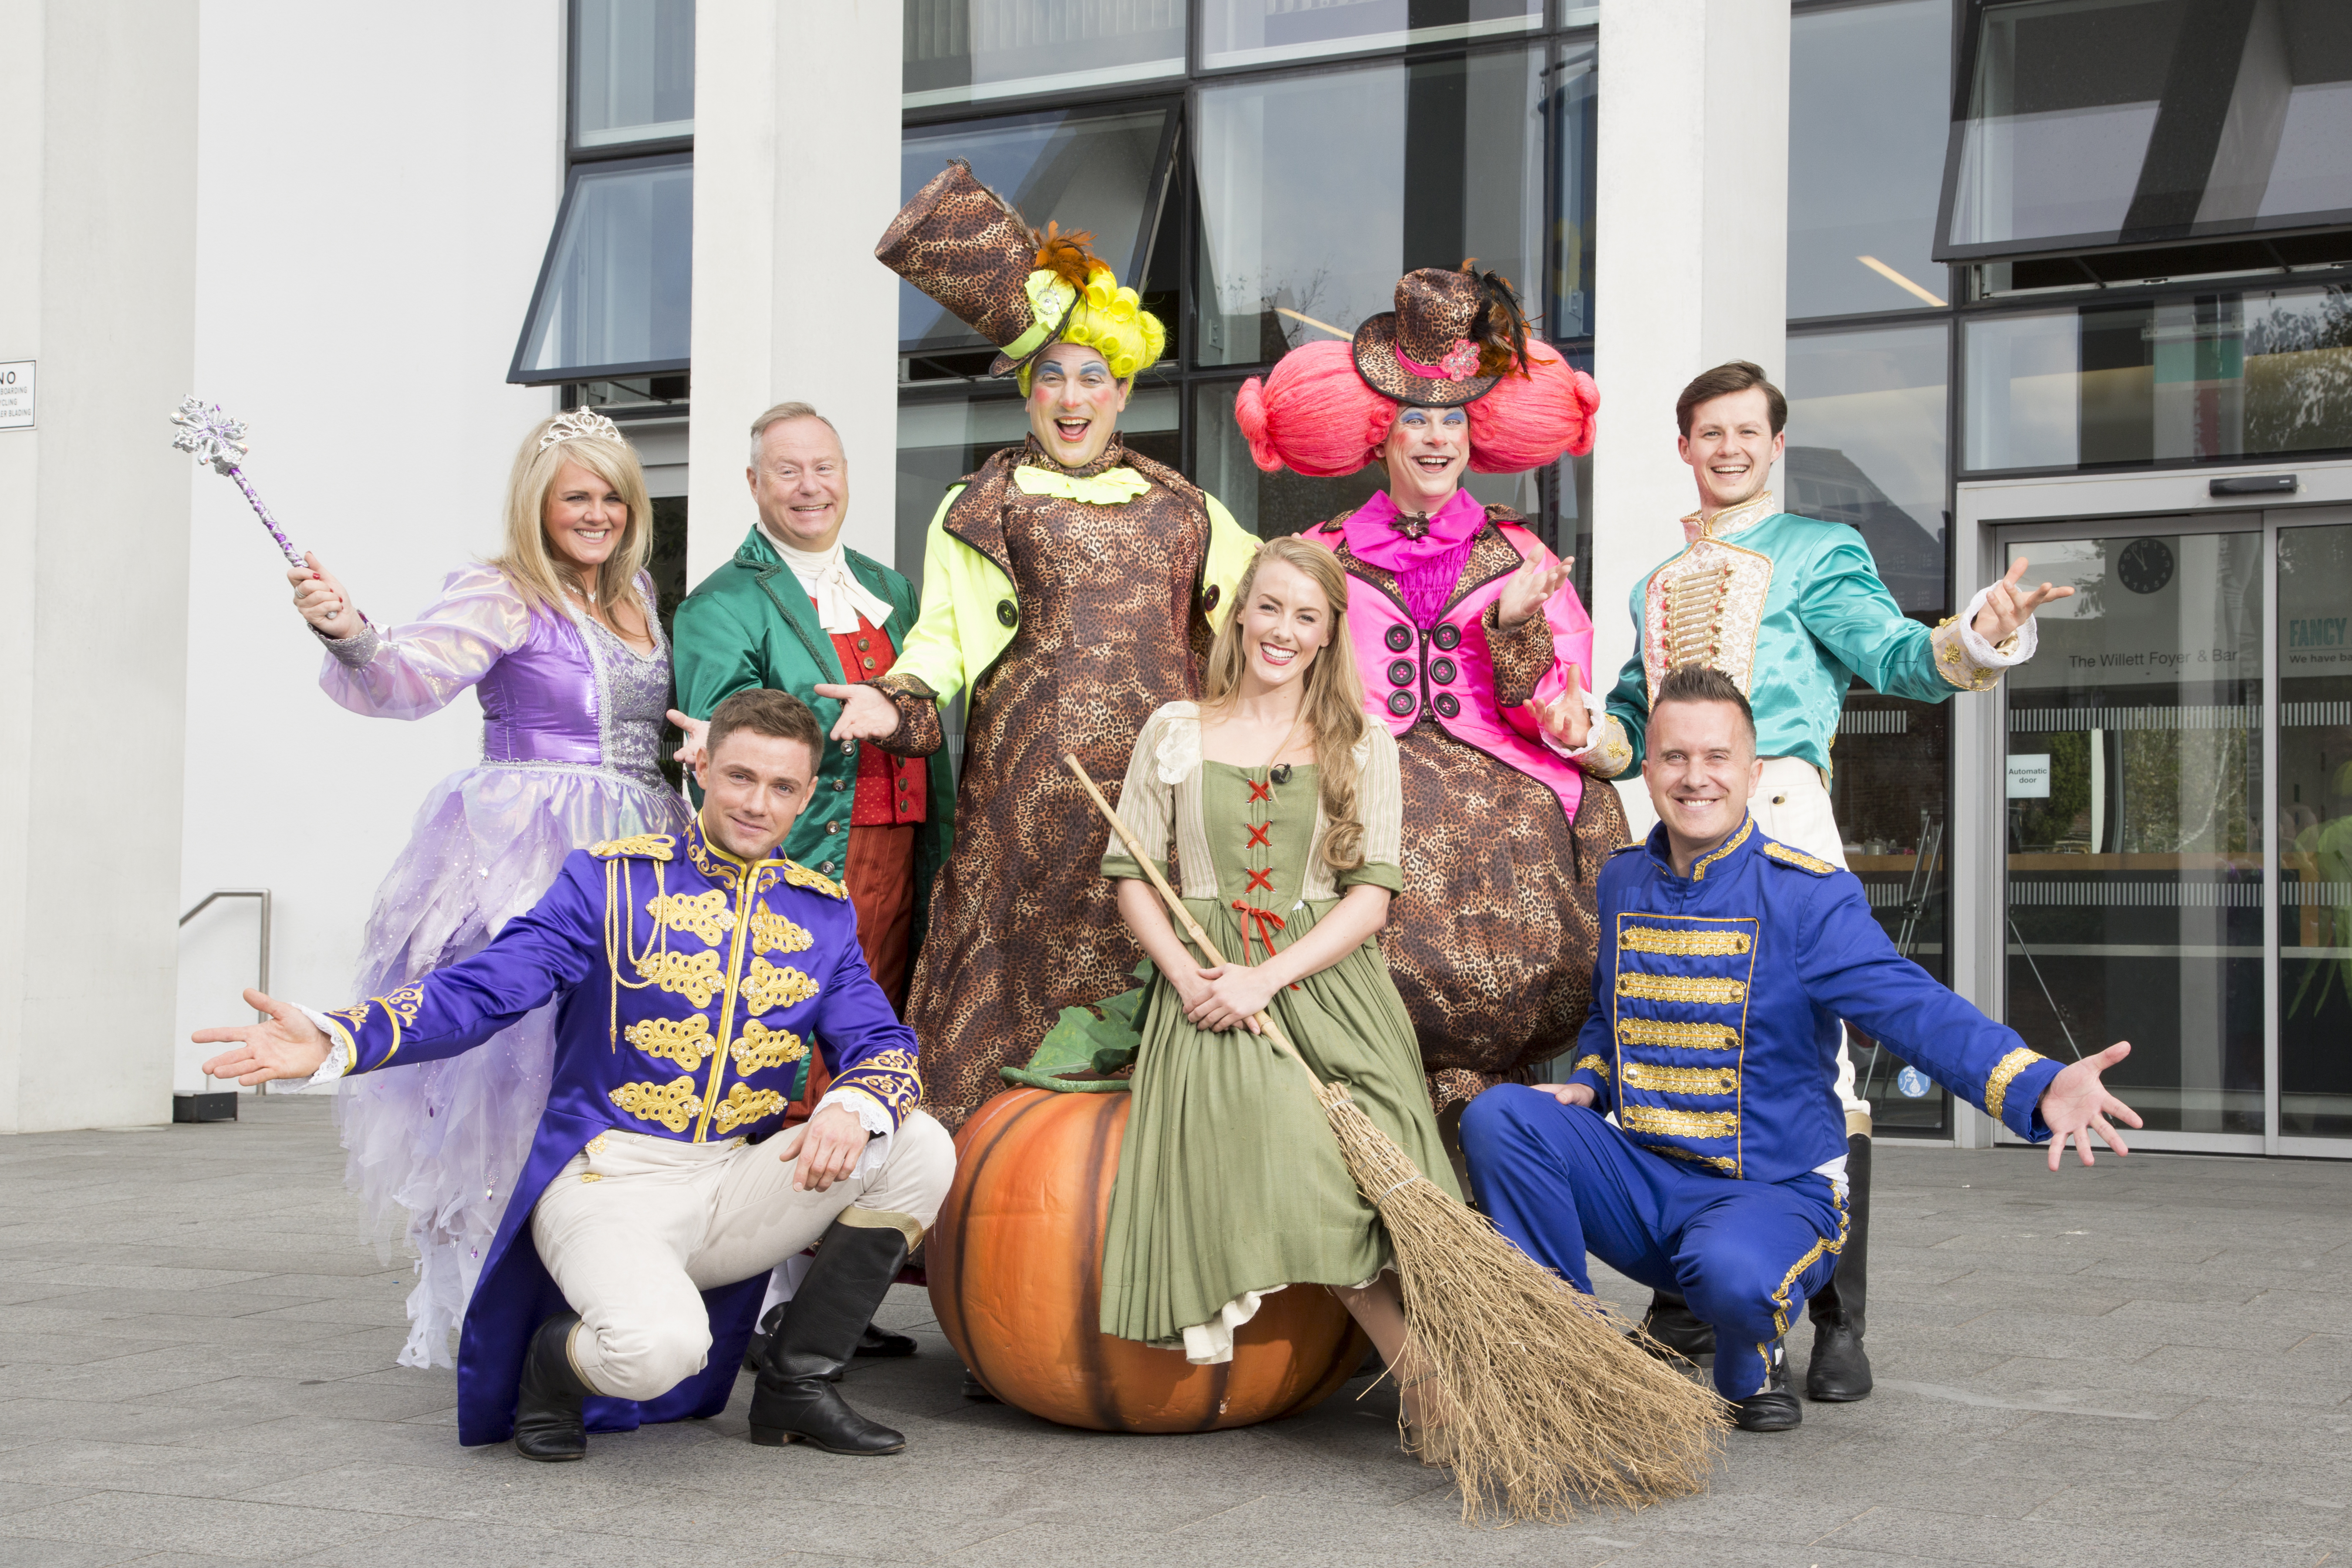 Get your panto tickets to Cinderella at the Marlowe! - Heart Kent5400 x 3600